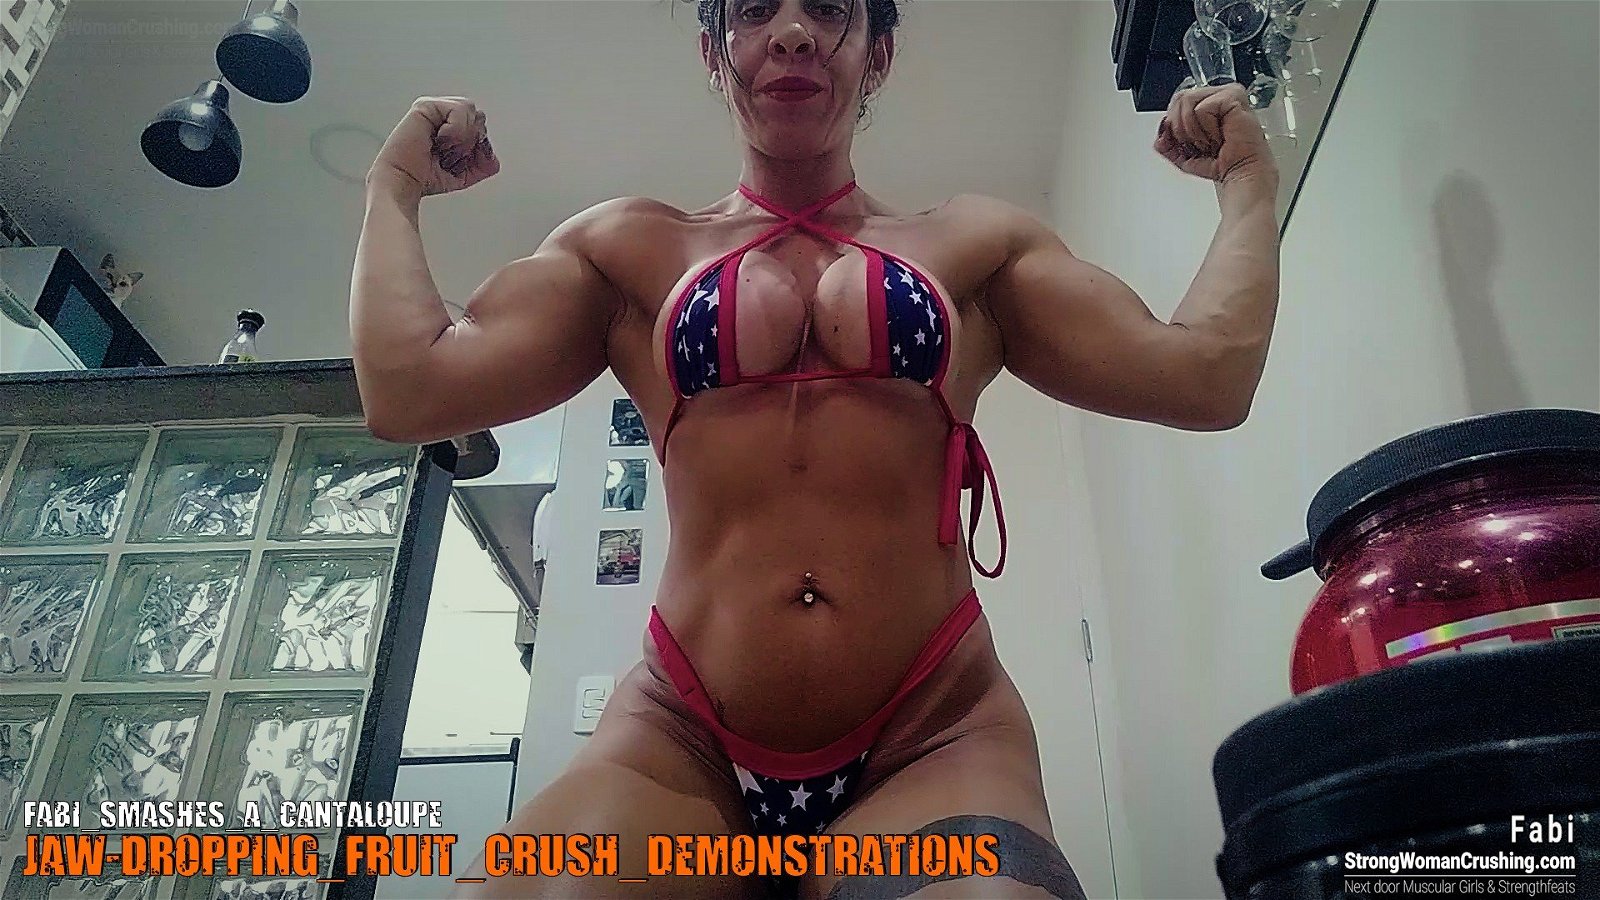 Photo by MusclegirlStrength with the username @MusclegirlStrength, who is a brand user,  October 22, 2023 at 12:56 PM and the text says '🔥 Get Exclusive Access to Fabi's Crushing Videos! 🔥

🎥 Don't miss out on watching Fabi crush a cantaloupe with her incredible strength!

👉 Join our membership at www.strongwomancrushing.com to unlock this amazing video!

💪 Witness the power and..'